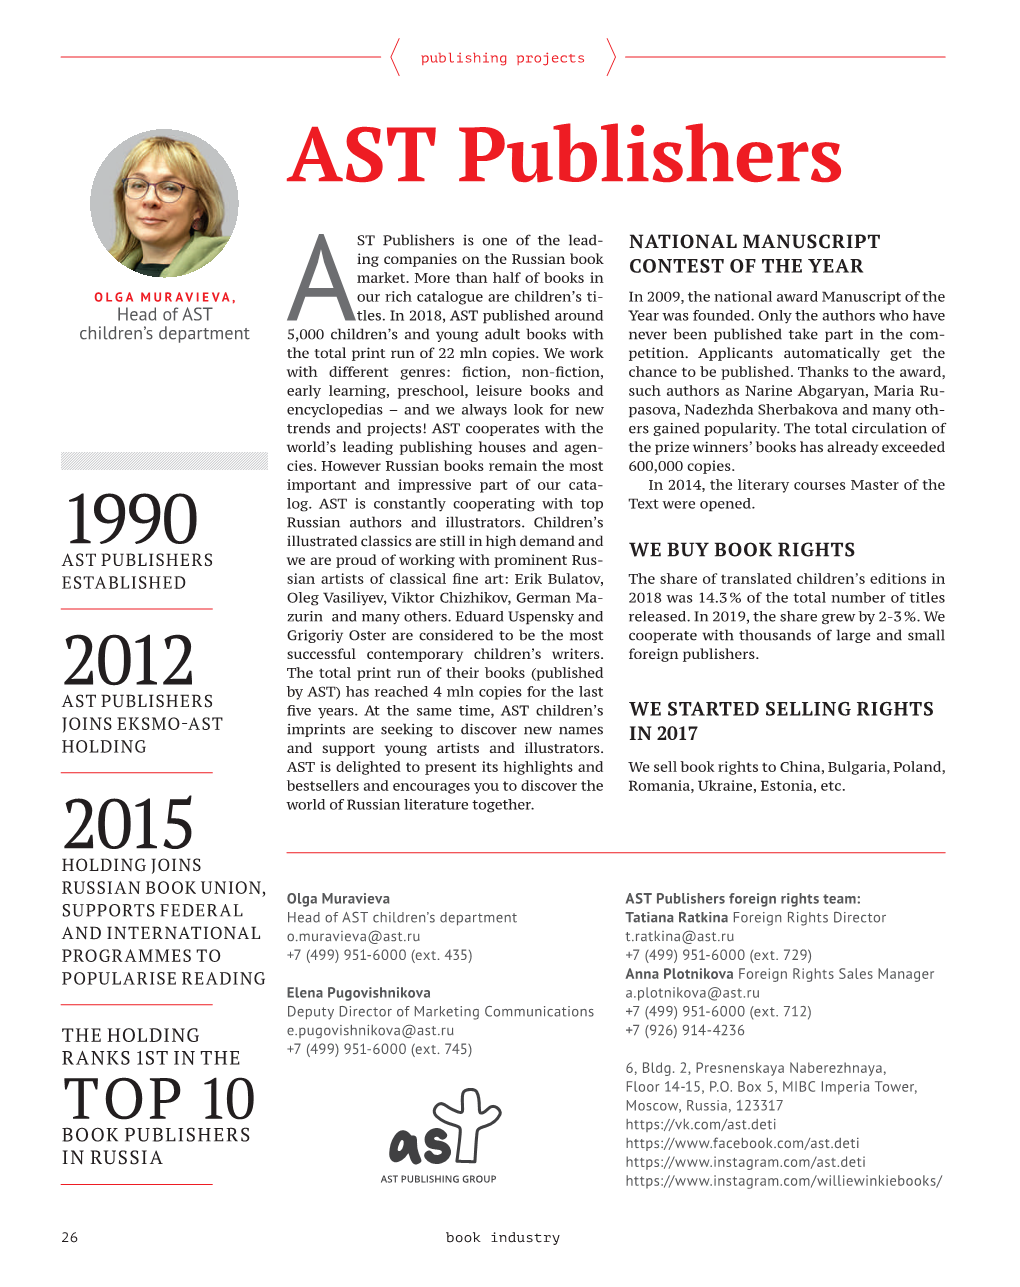 AST Publishers Is One of the Lead